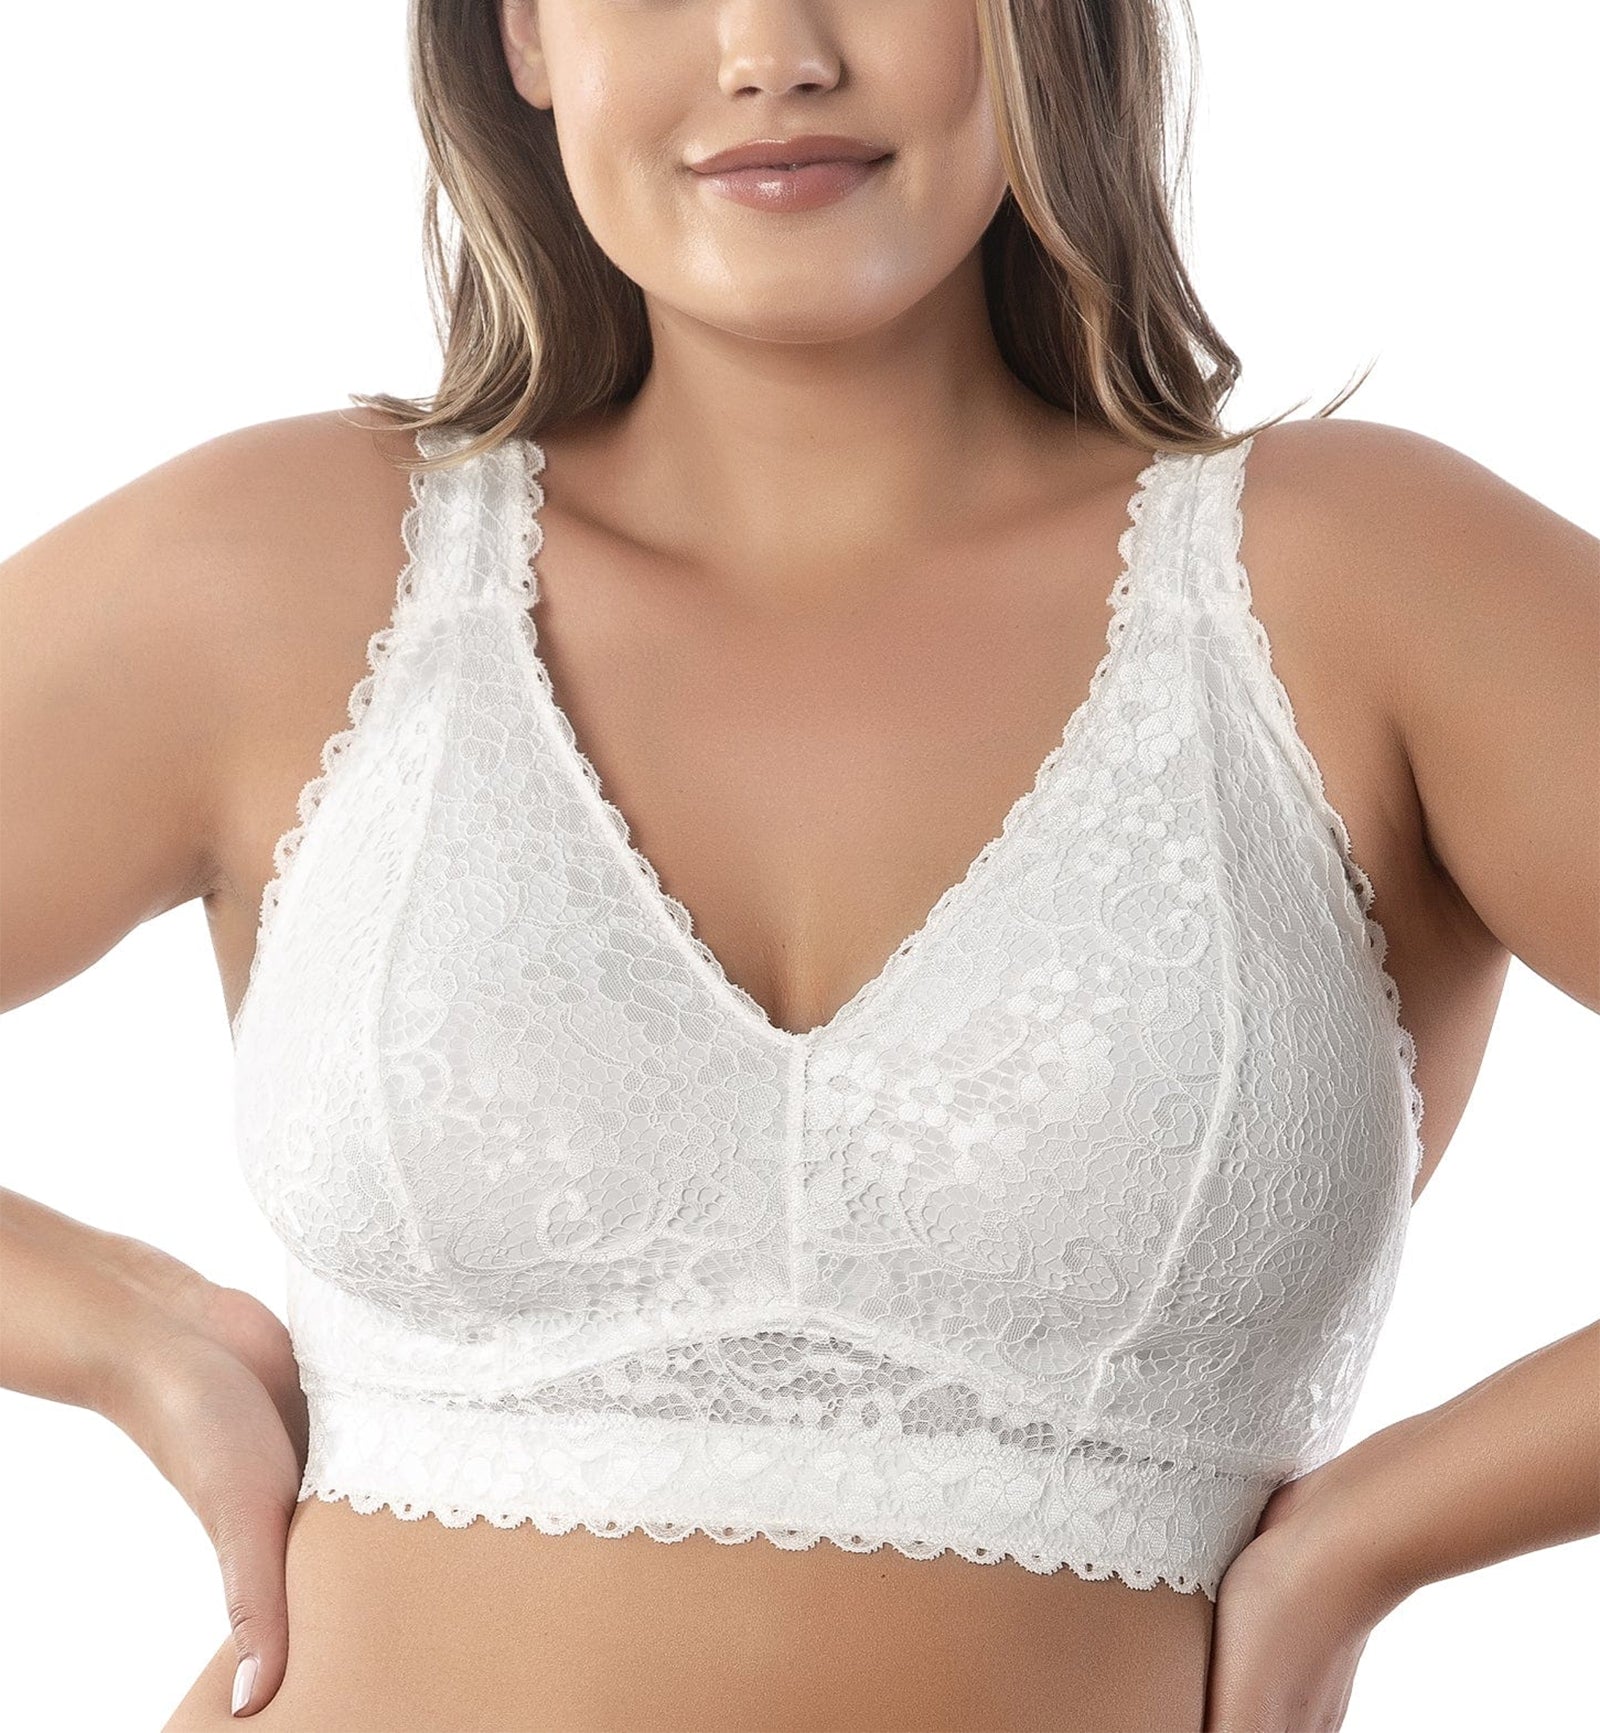 Parfait Adriana Banded Stretch Lace Wireless Bralette (P5482),30DD,Pearl White - Pearl White,30DD